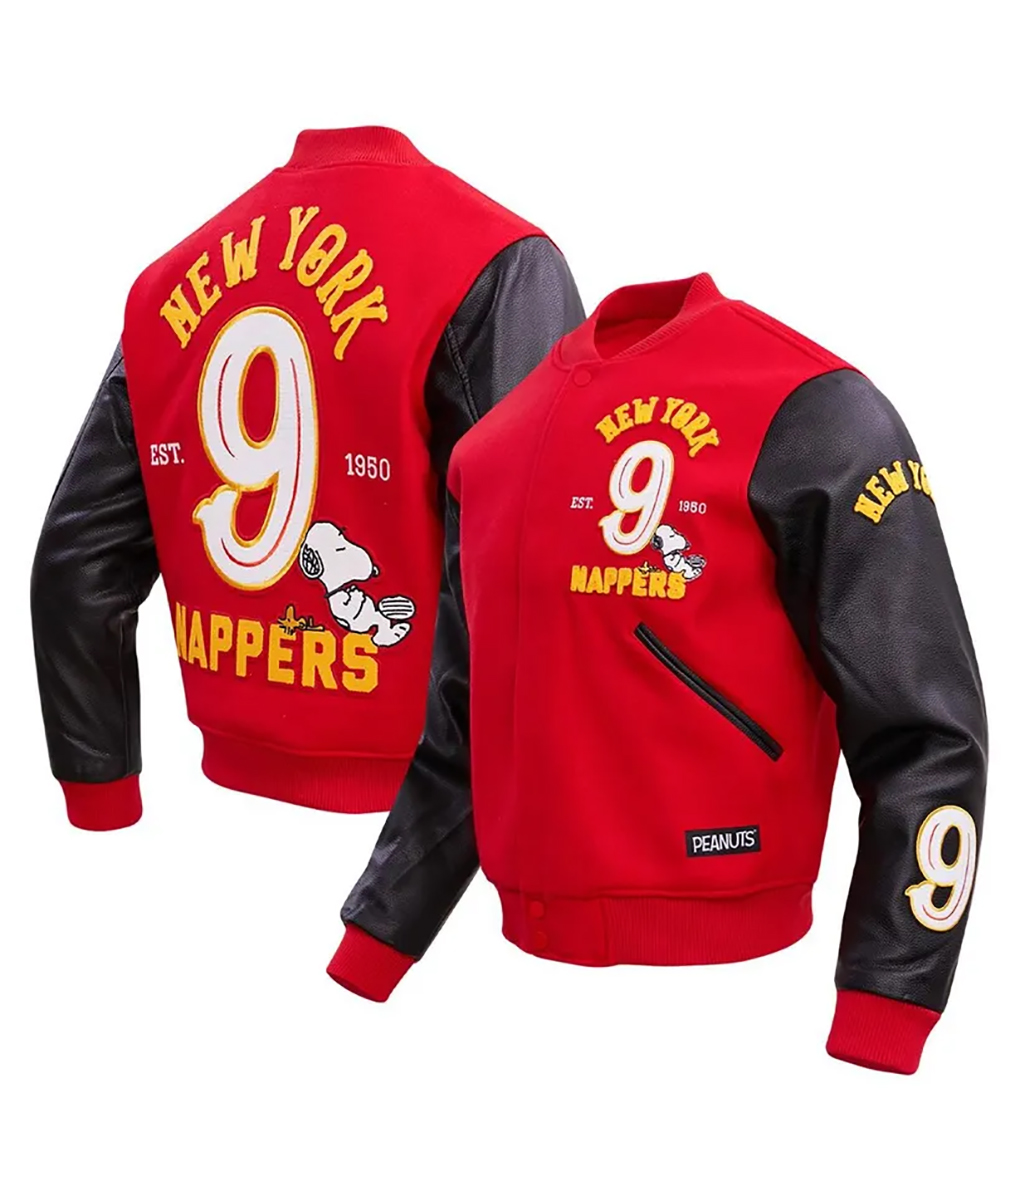 Snoopy New York Nappers Red Varsity Jacket (2)